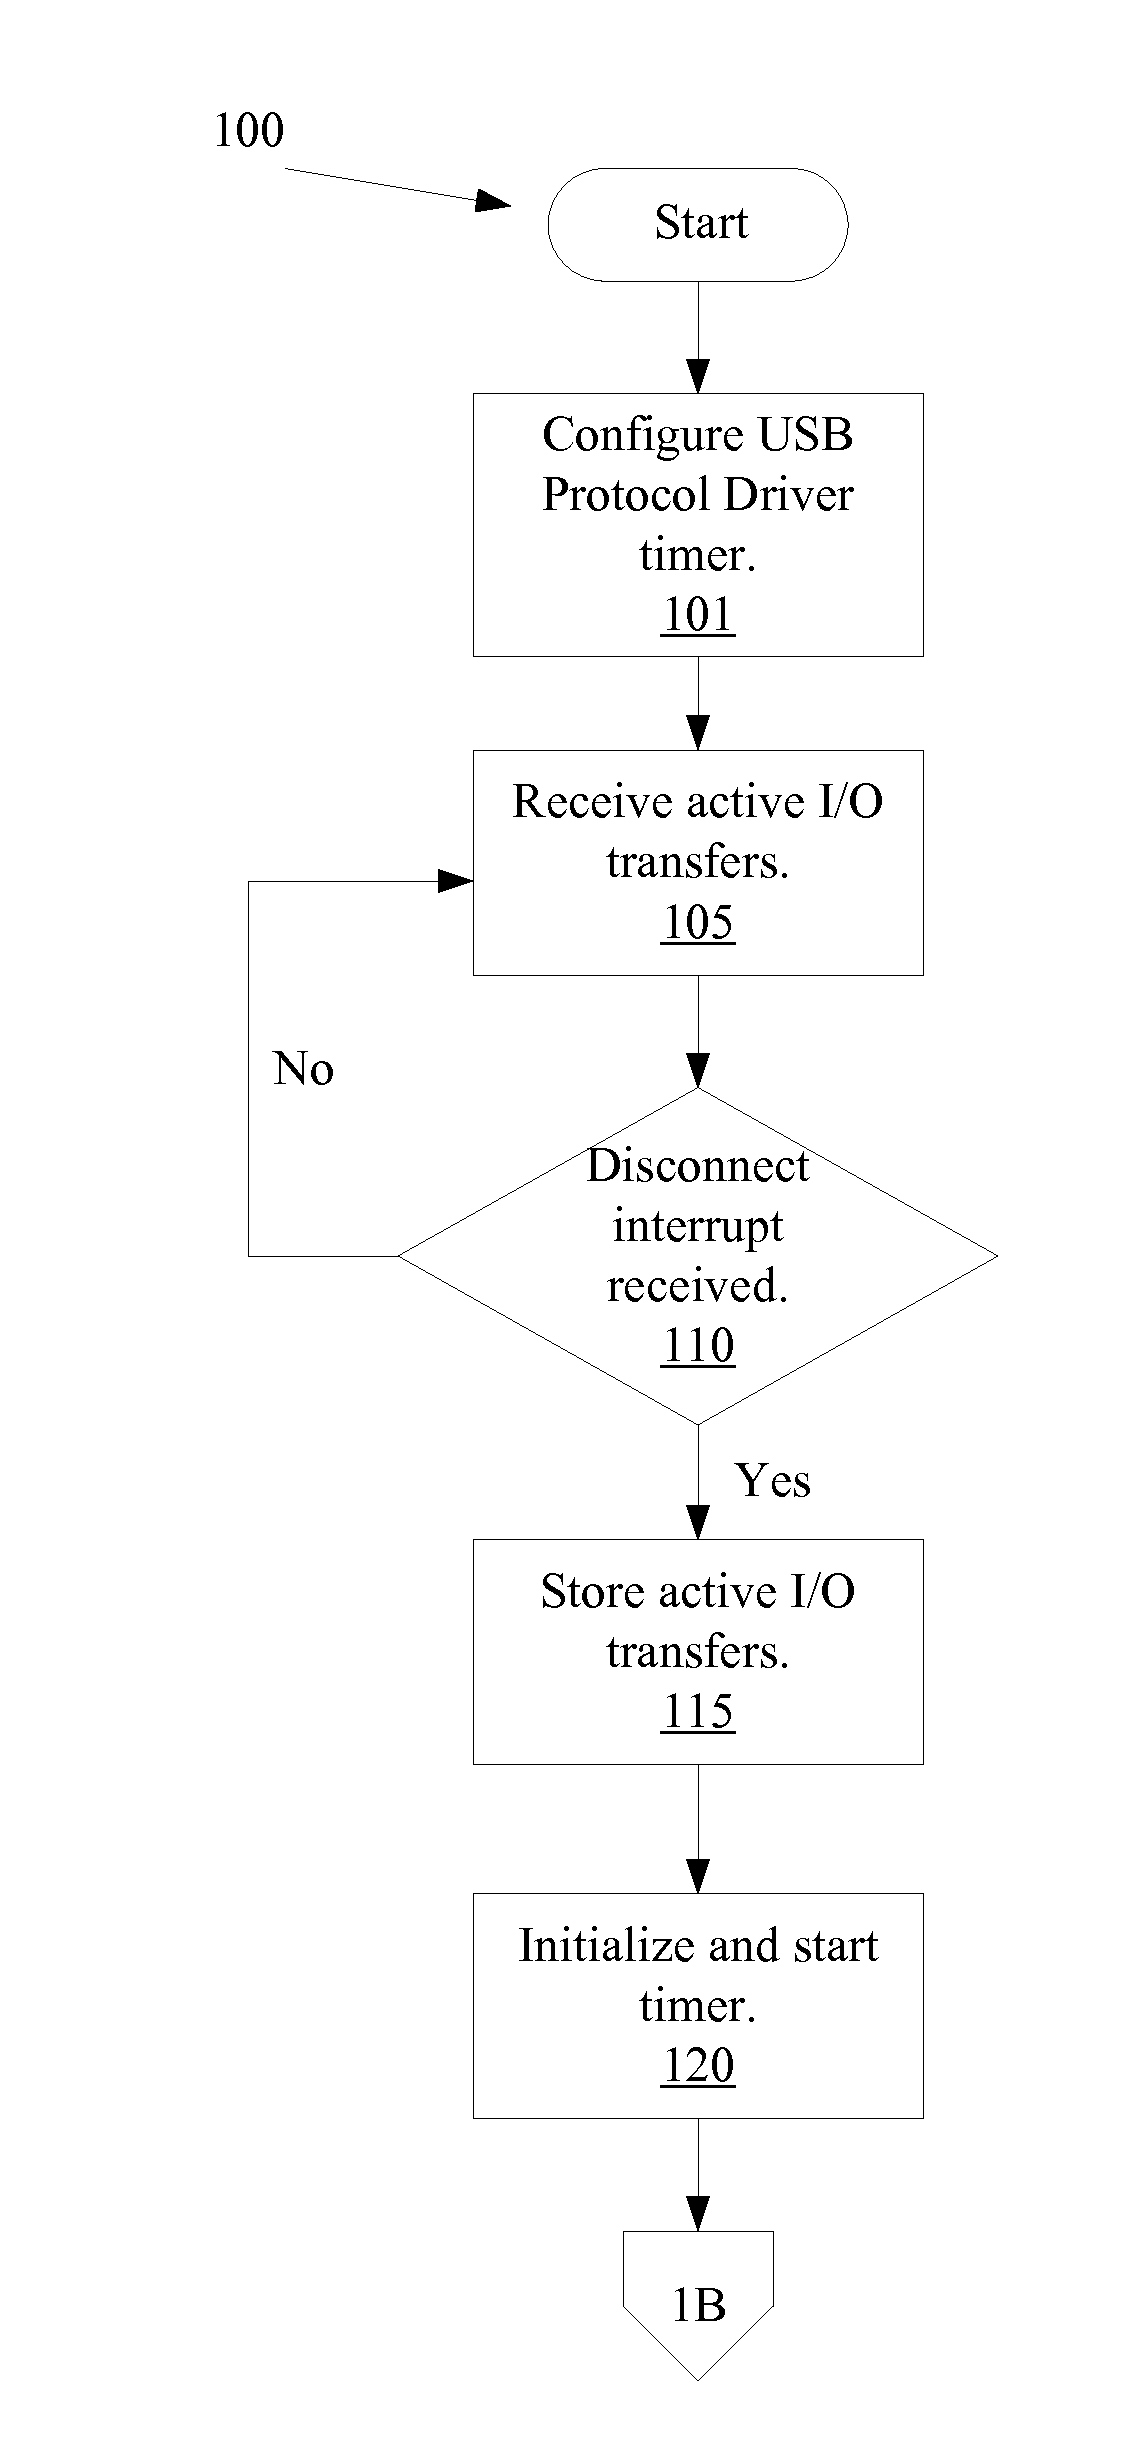 Continuously transferring data using a USB mass storage device